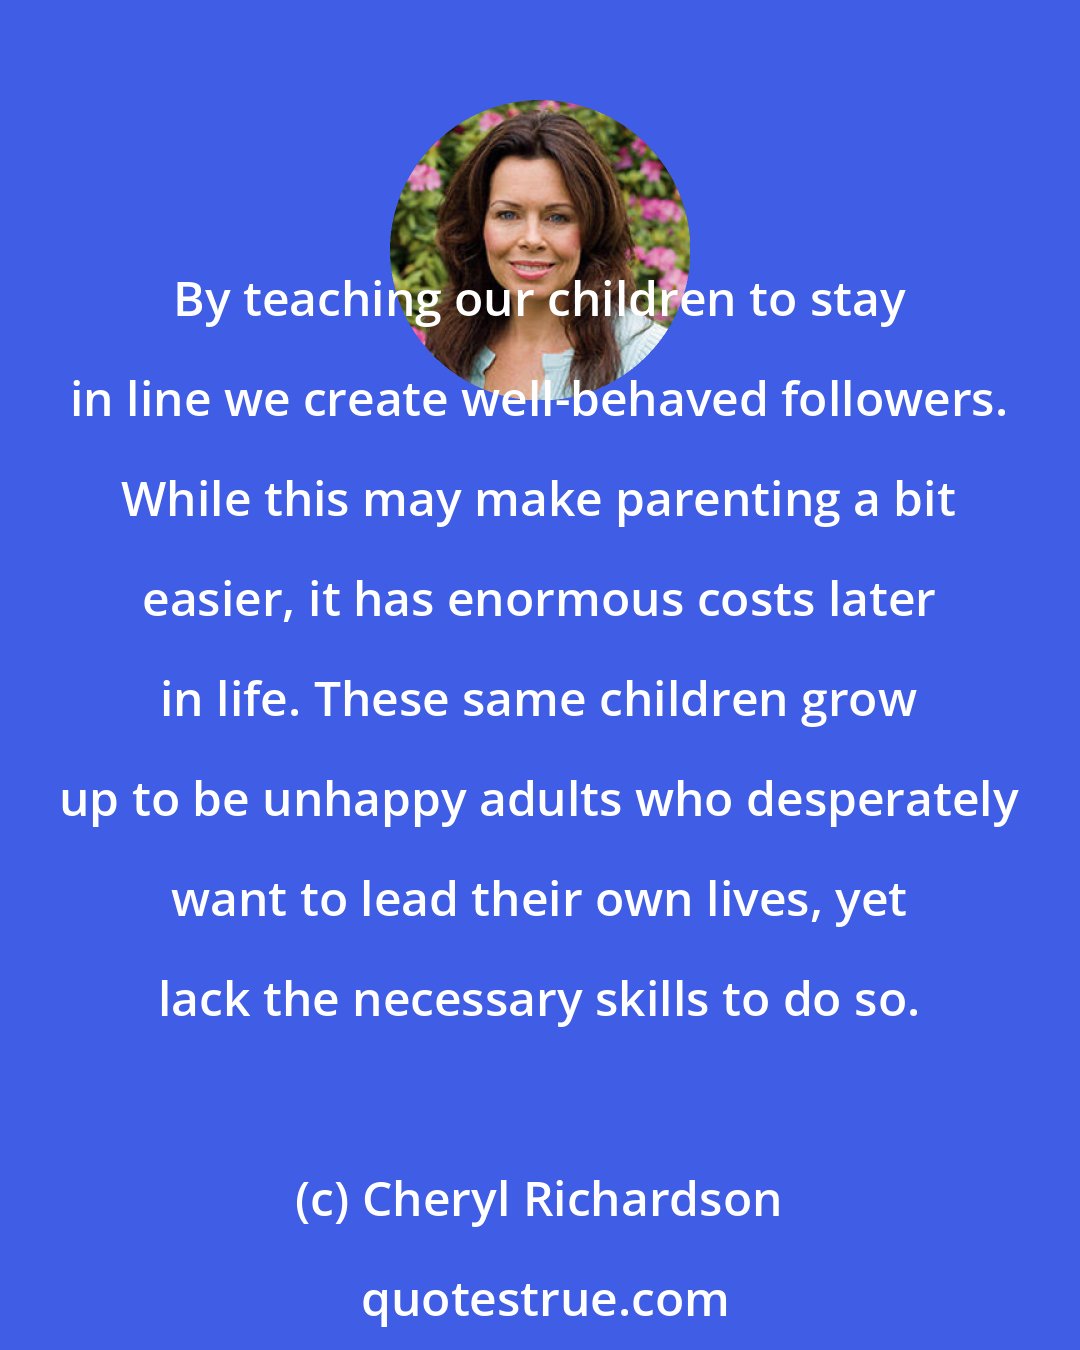 Cheryl Richardson: By teaching our children to stay in line we create well-behaved followers. While this may make parenting a bit easier, it has enormous costs later in life. These same children grow up to be unhappy adults who desperately want to lead their own lives, yet lack the necessary skills to do so.